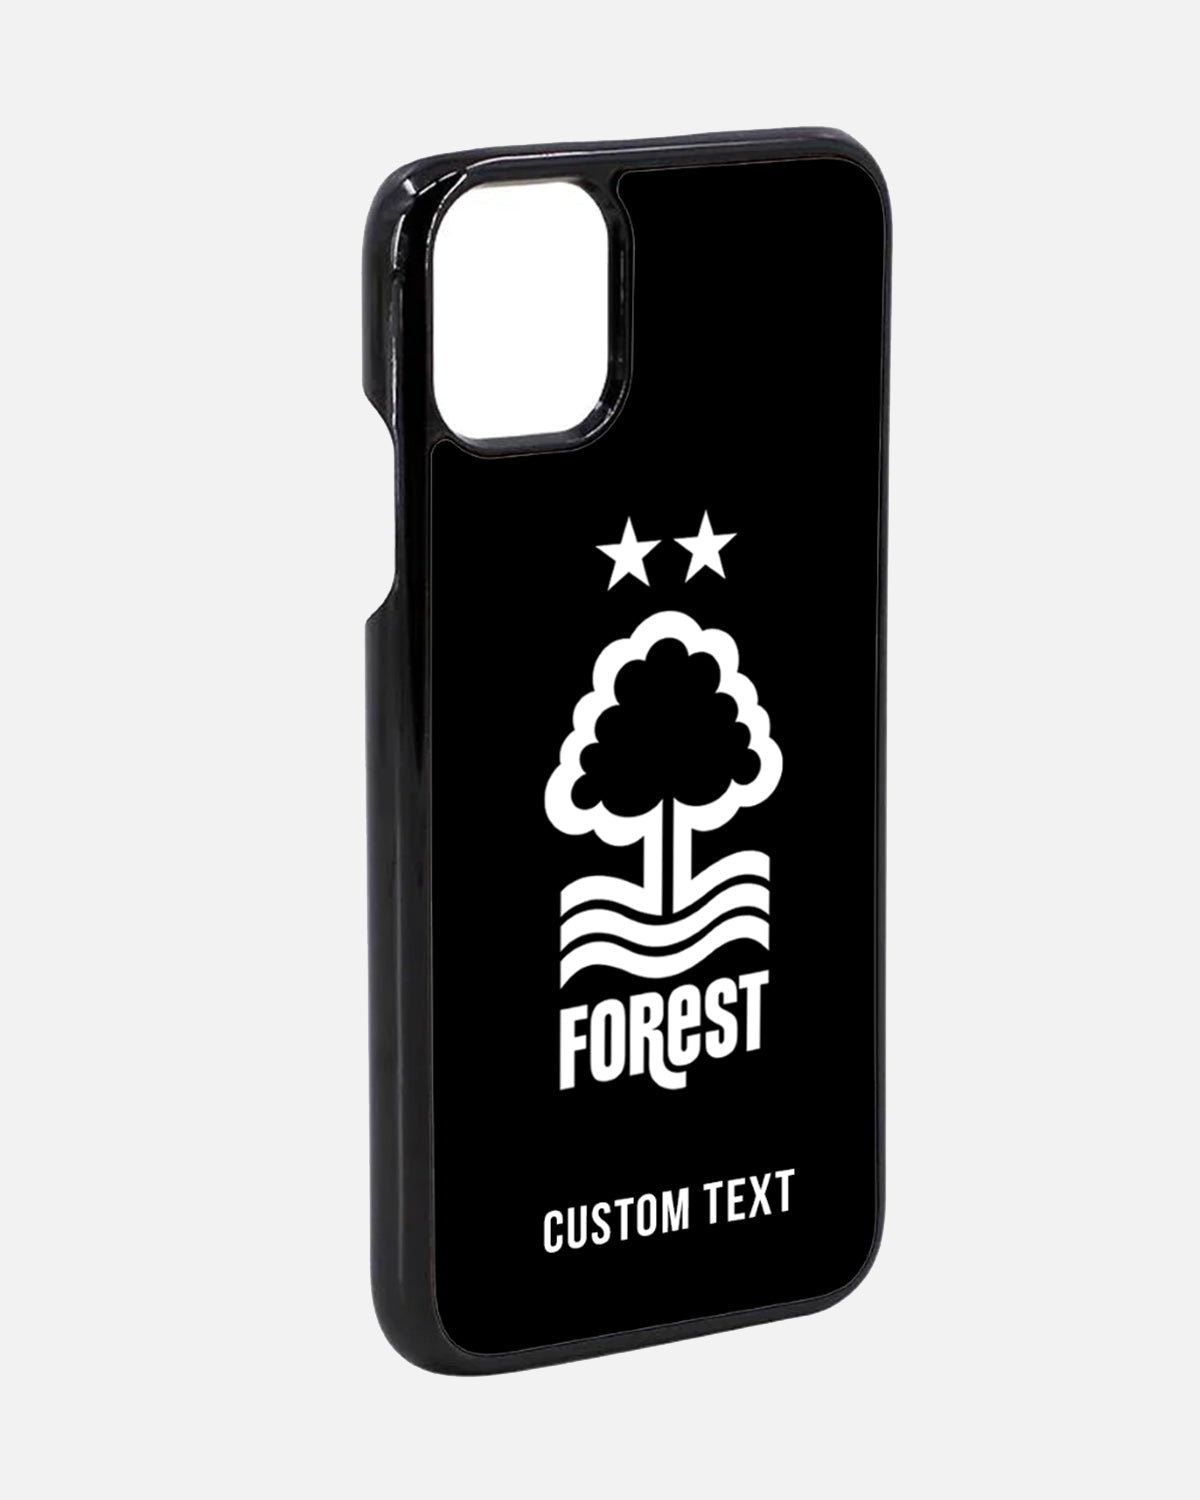 NFFC Black Crest Personalised Phone Cover - Nottingham Forest FC